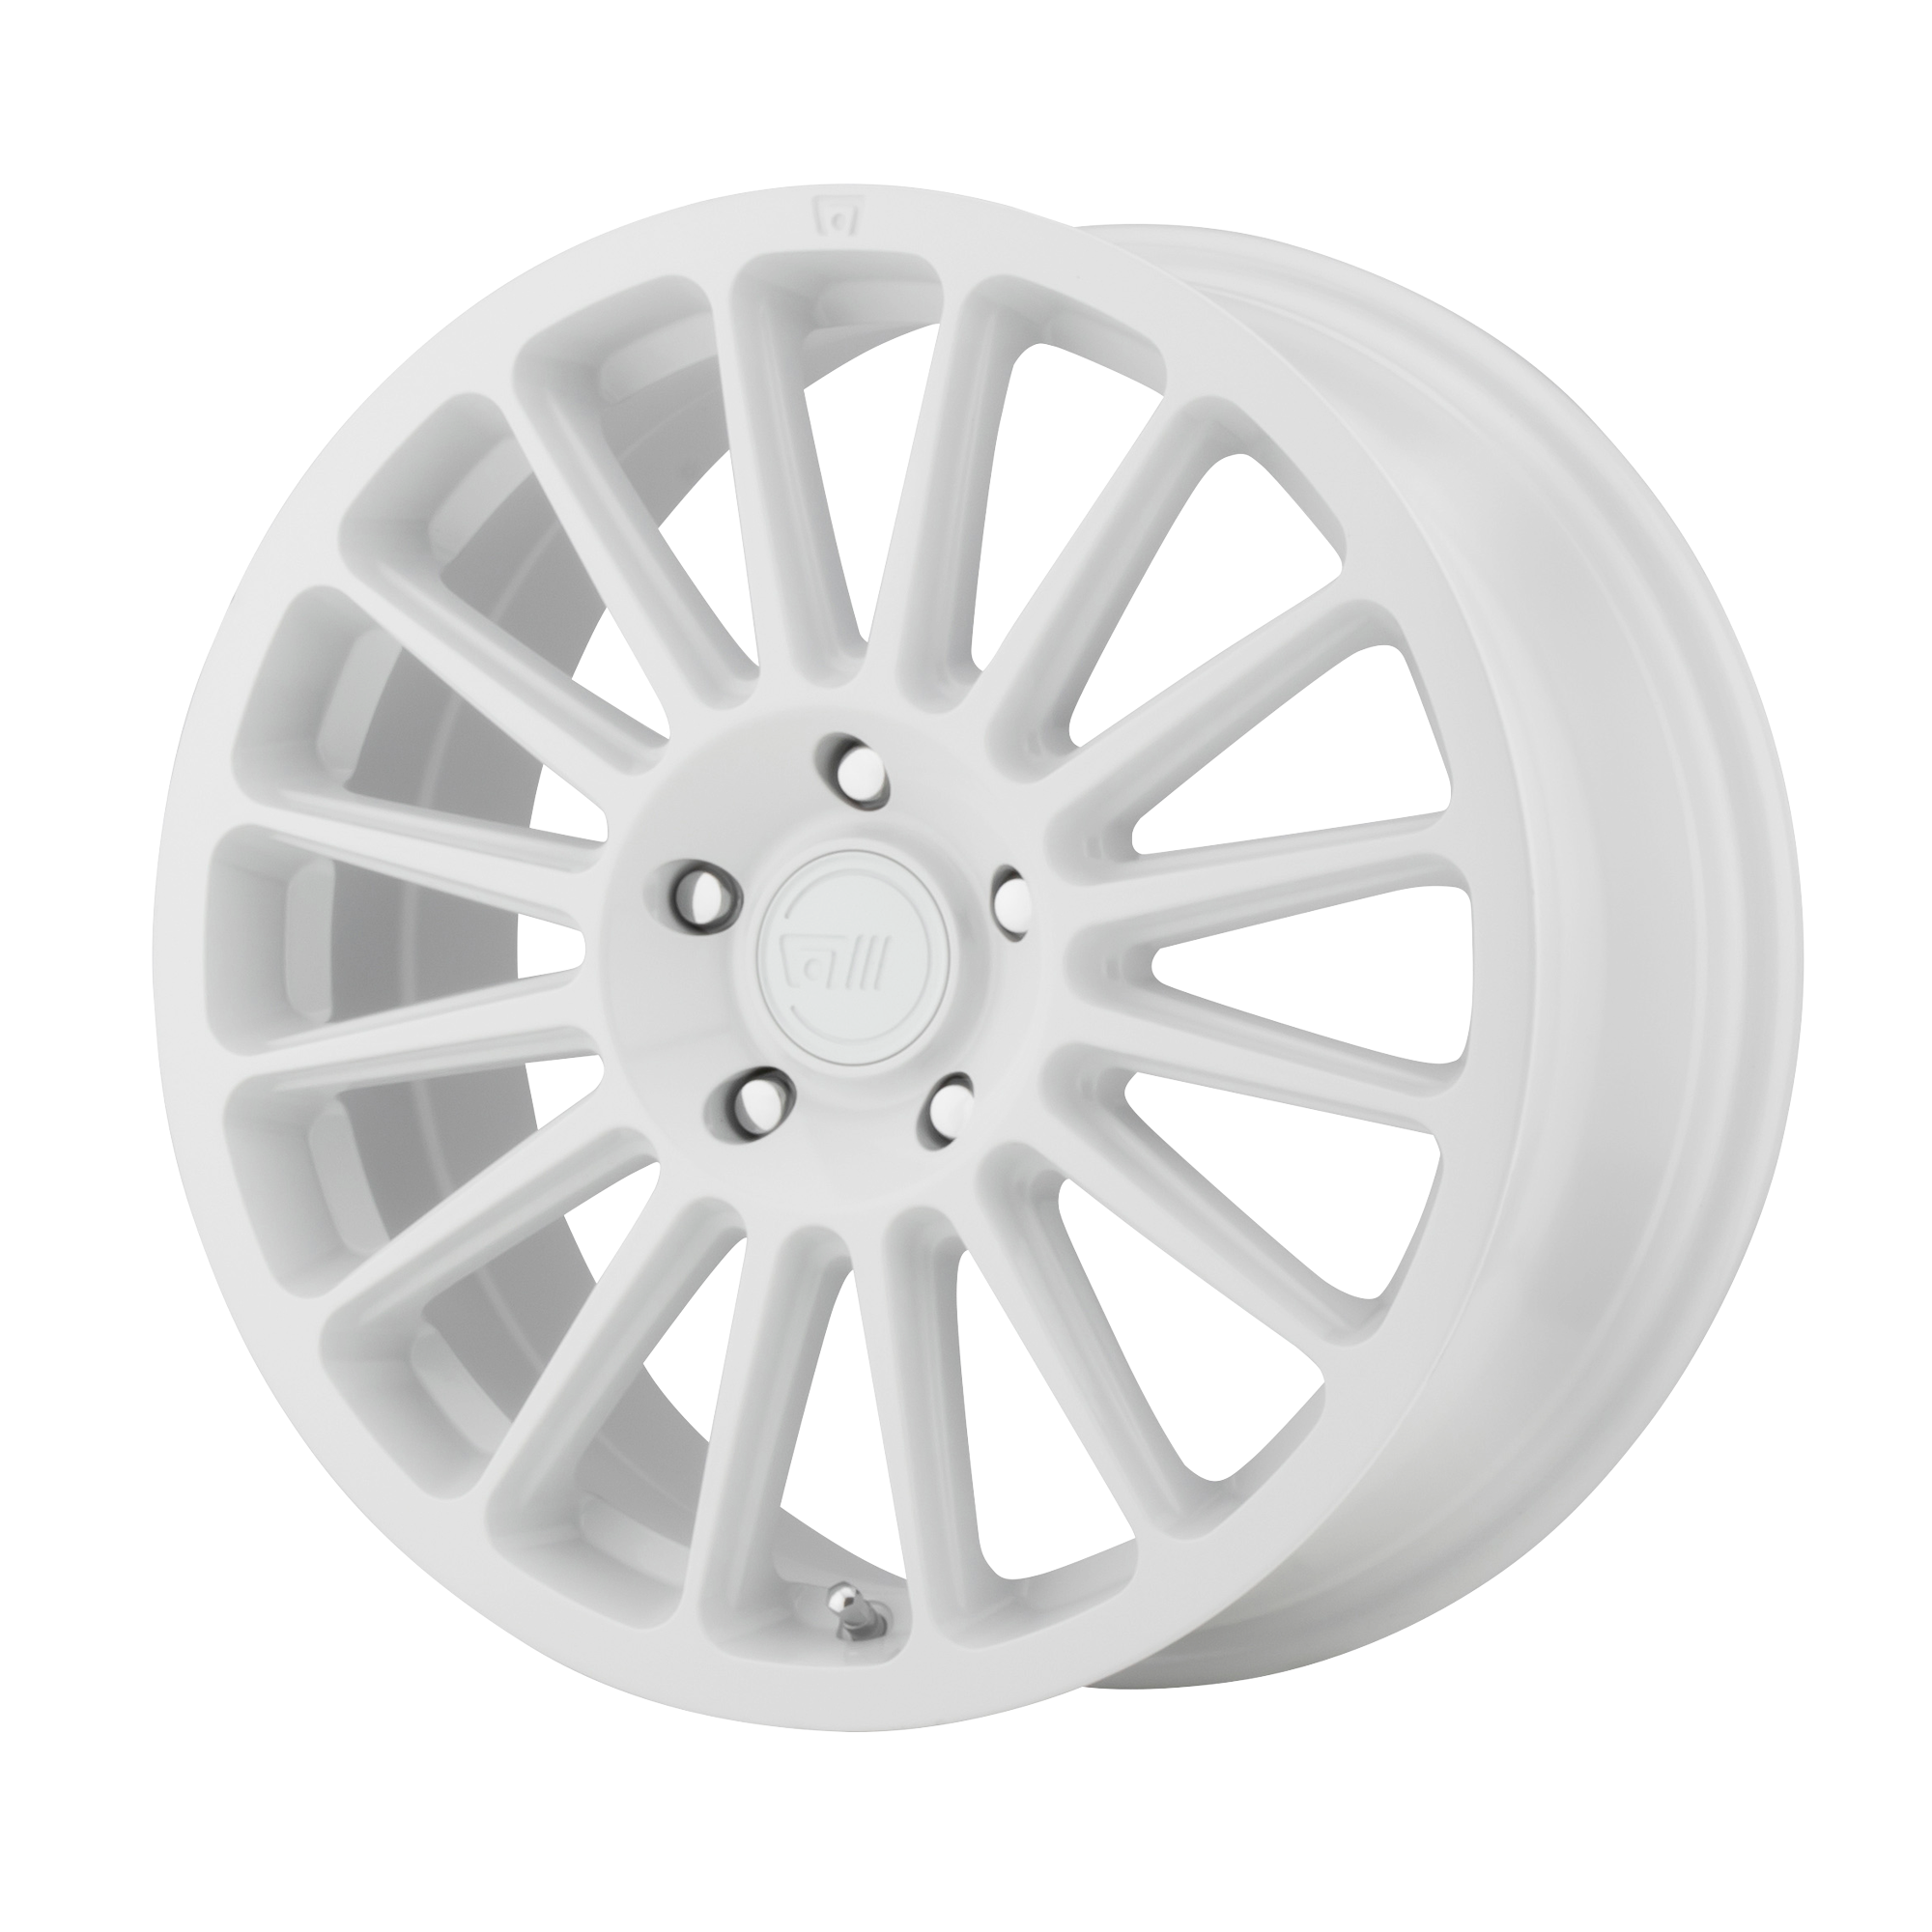 MR141 17x7.5 5x100.00 WHITE (40 mm) - Tires and Engine Performance